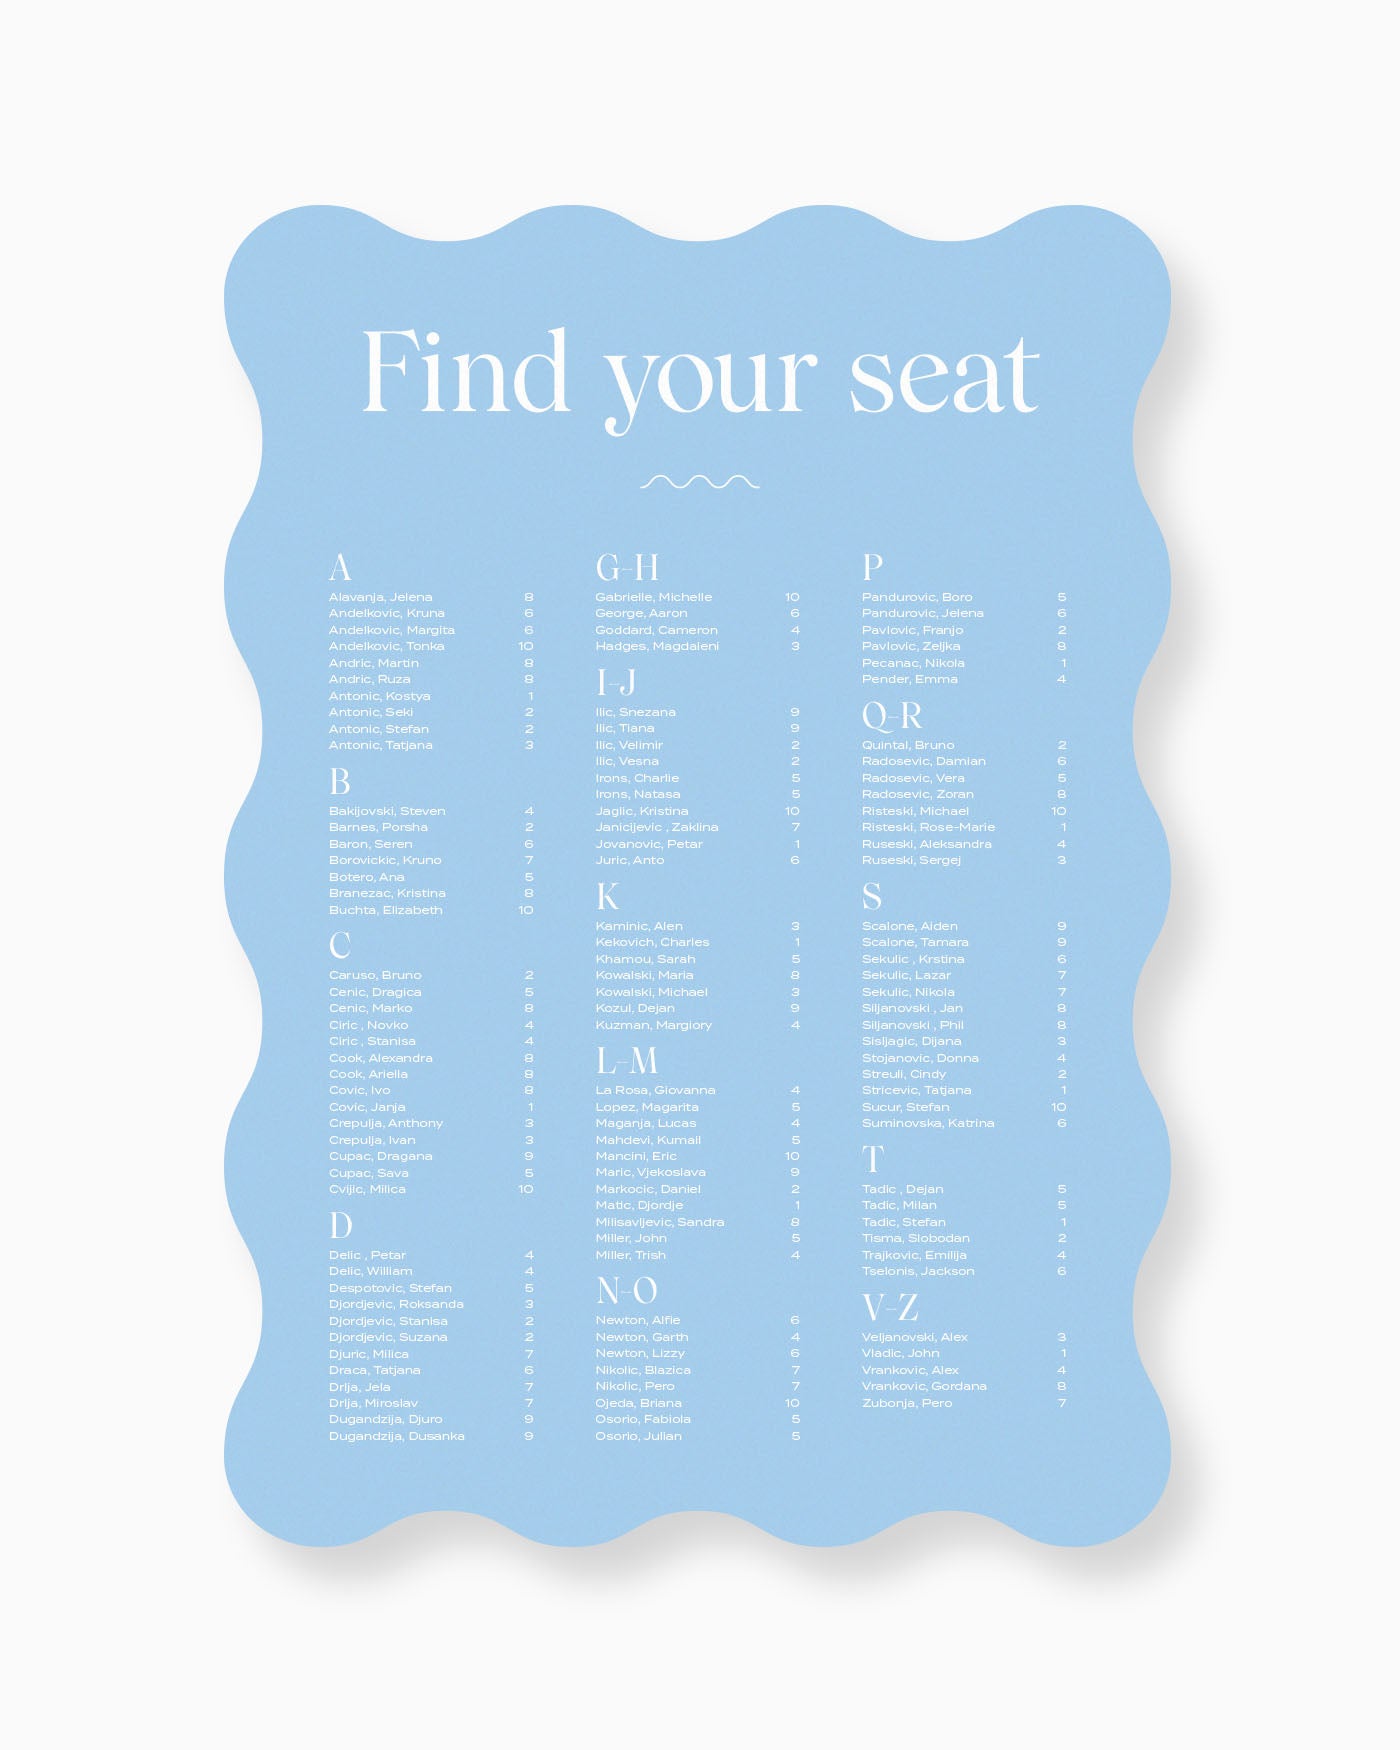 Peppermint Press On the Day Wave Seating Chart